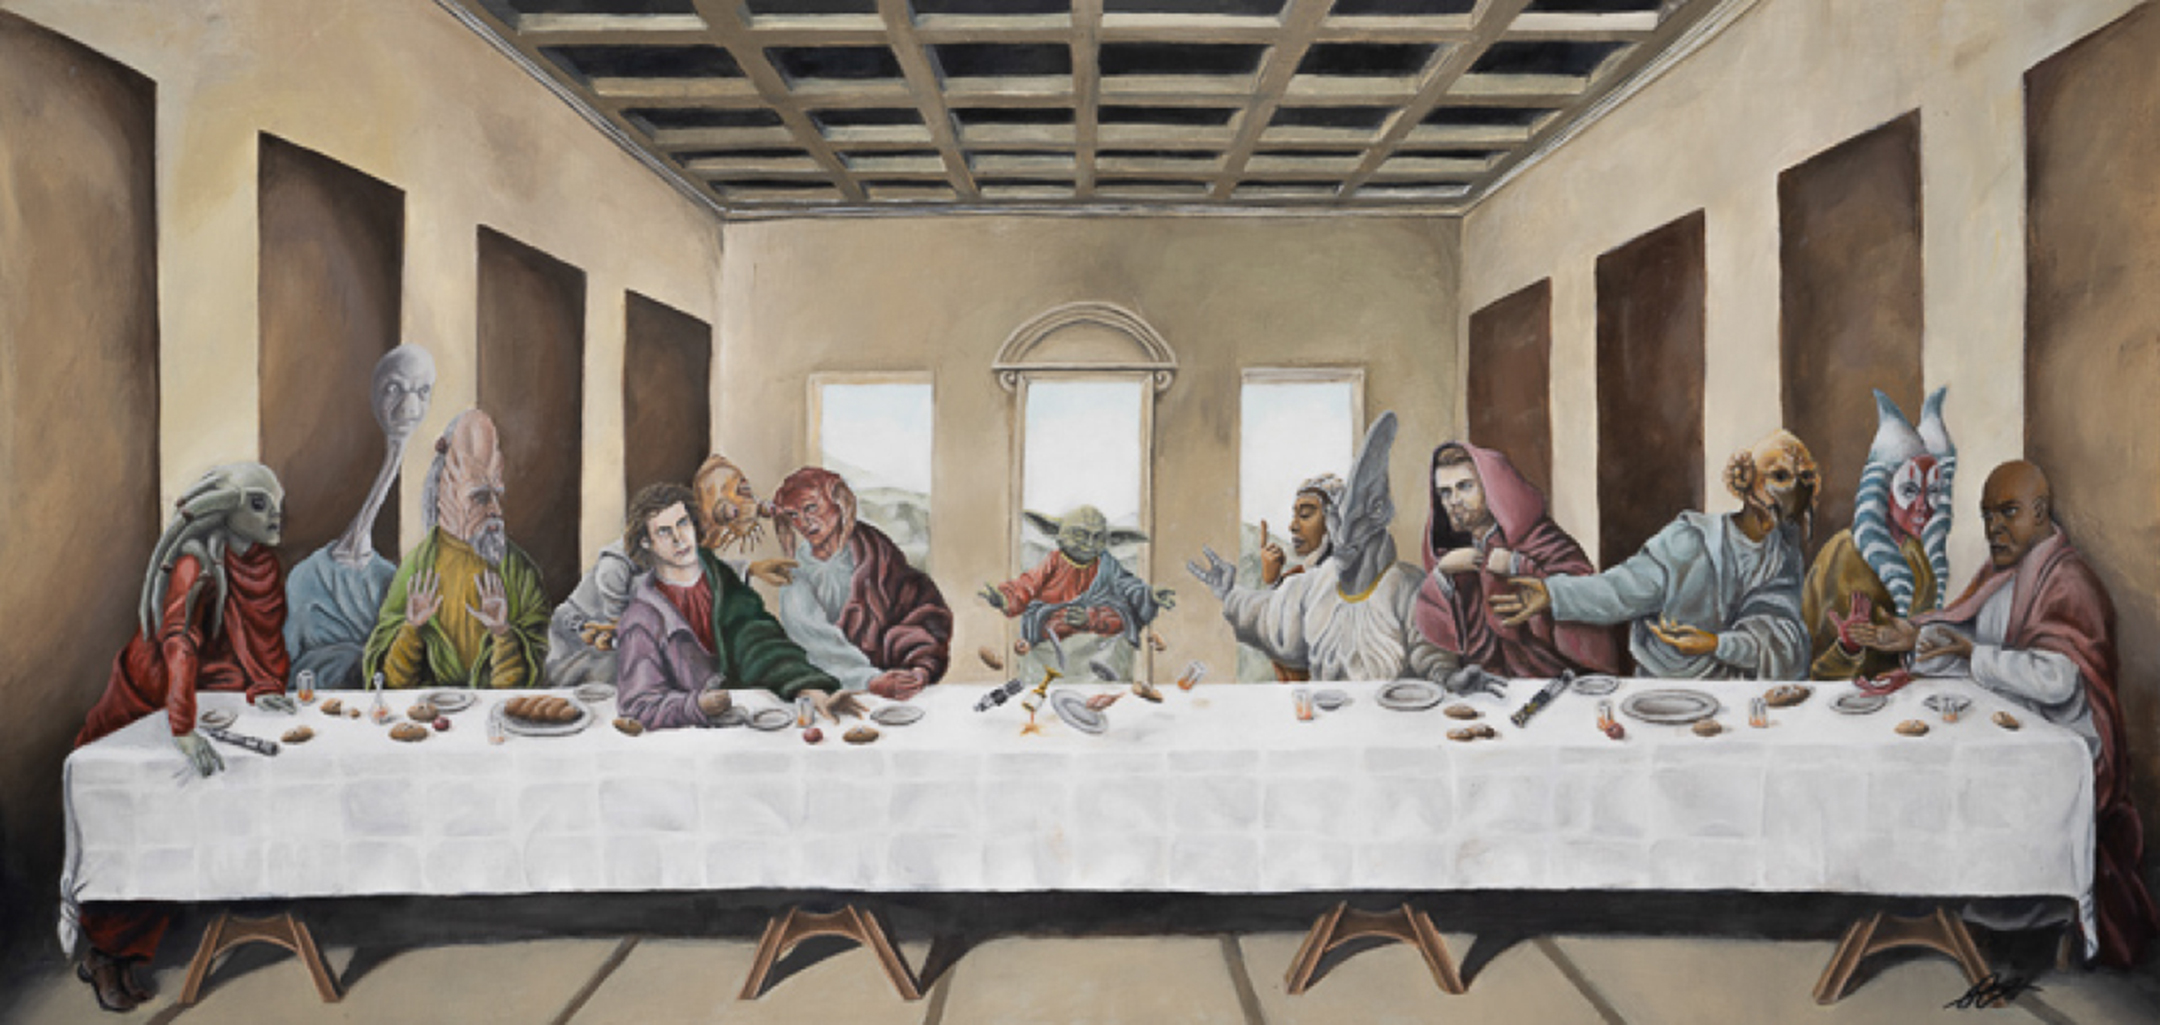 a recreation of the painting the last supper, using star wars characters instead of jesus and the apostles